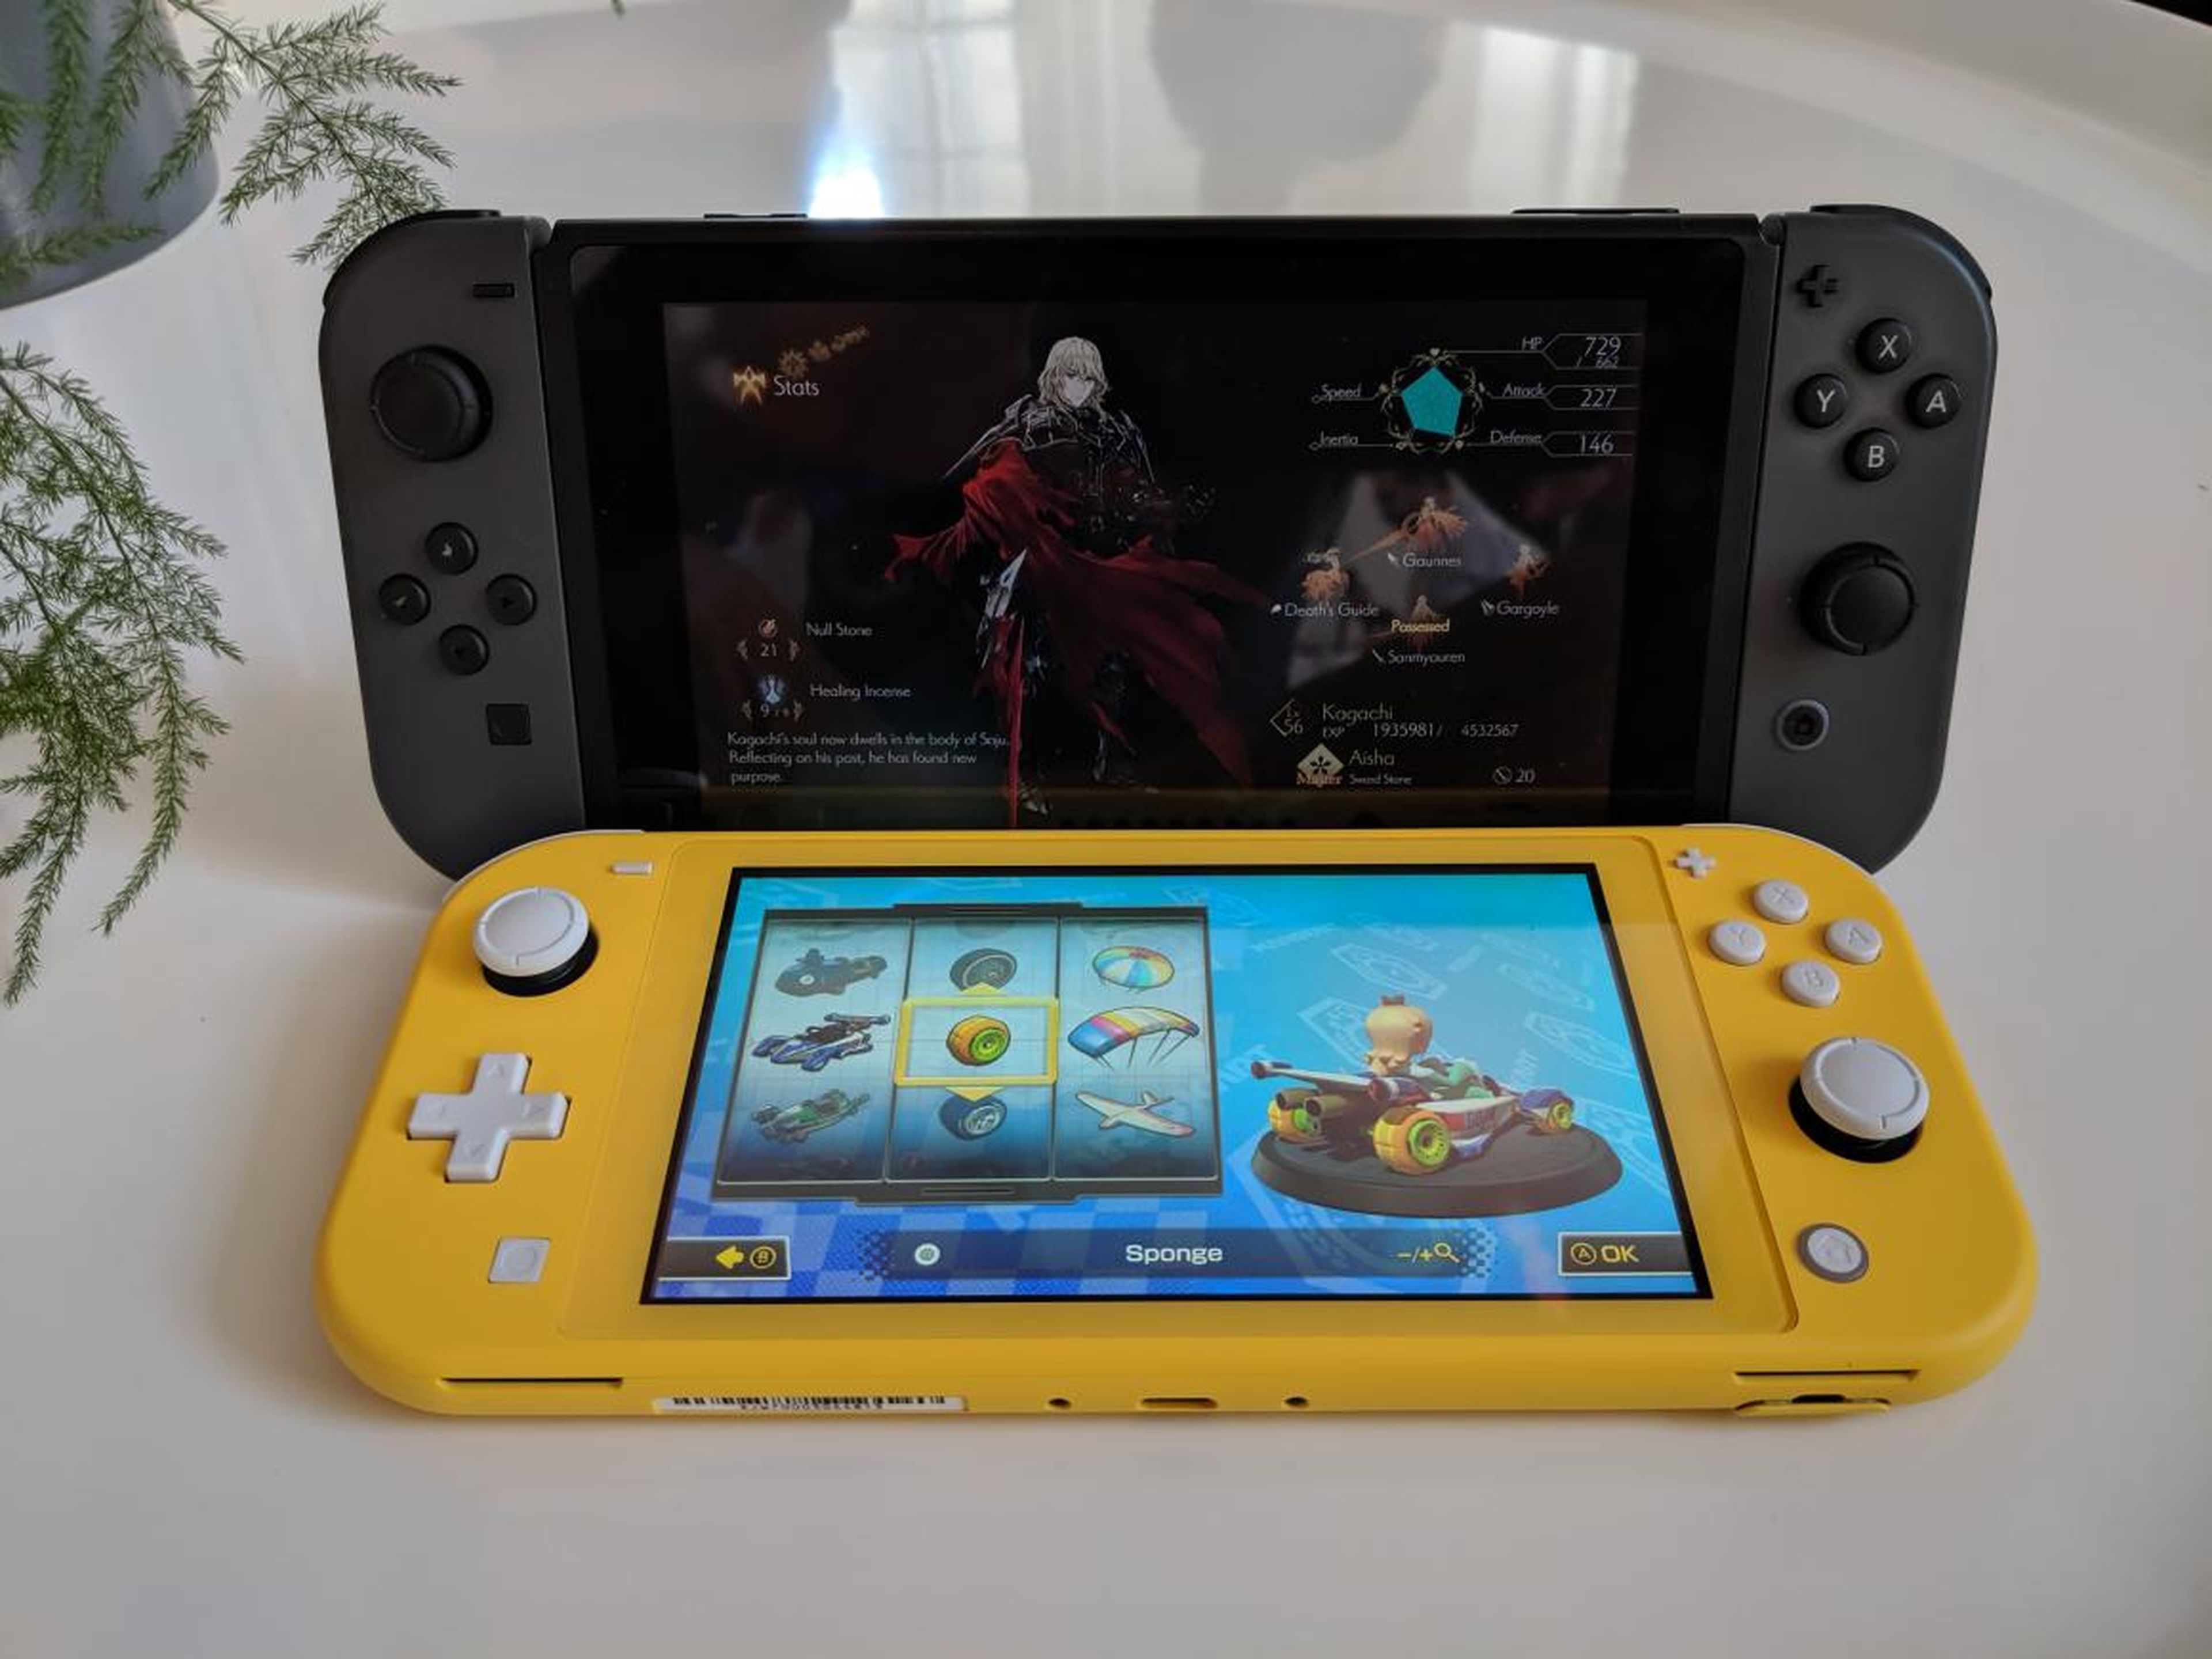 The Switch Lite doesn't have a stand like the original Switch, so it will be tough to play games with a friend or use a different controller.